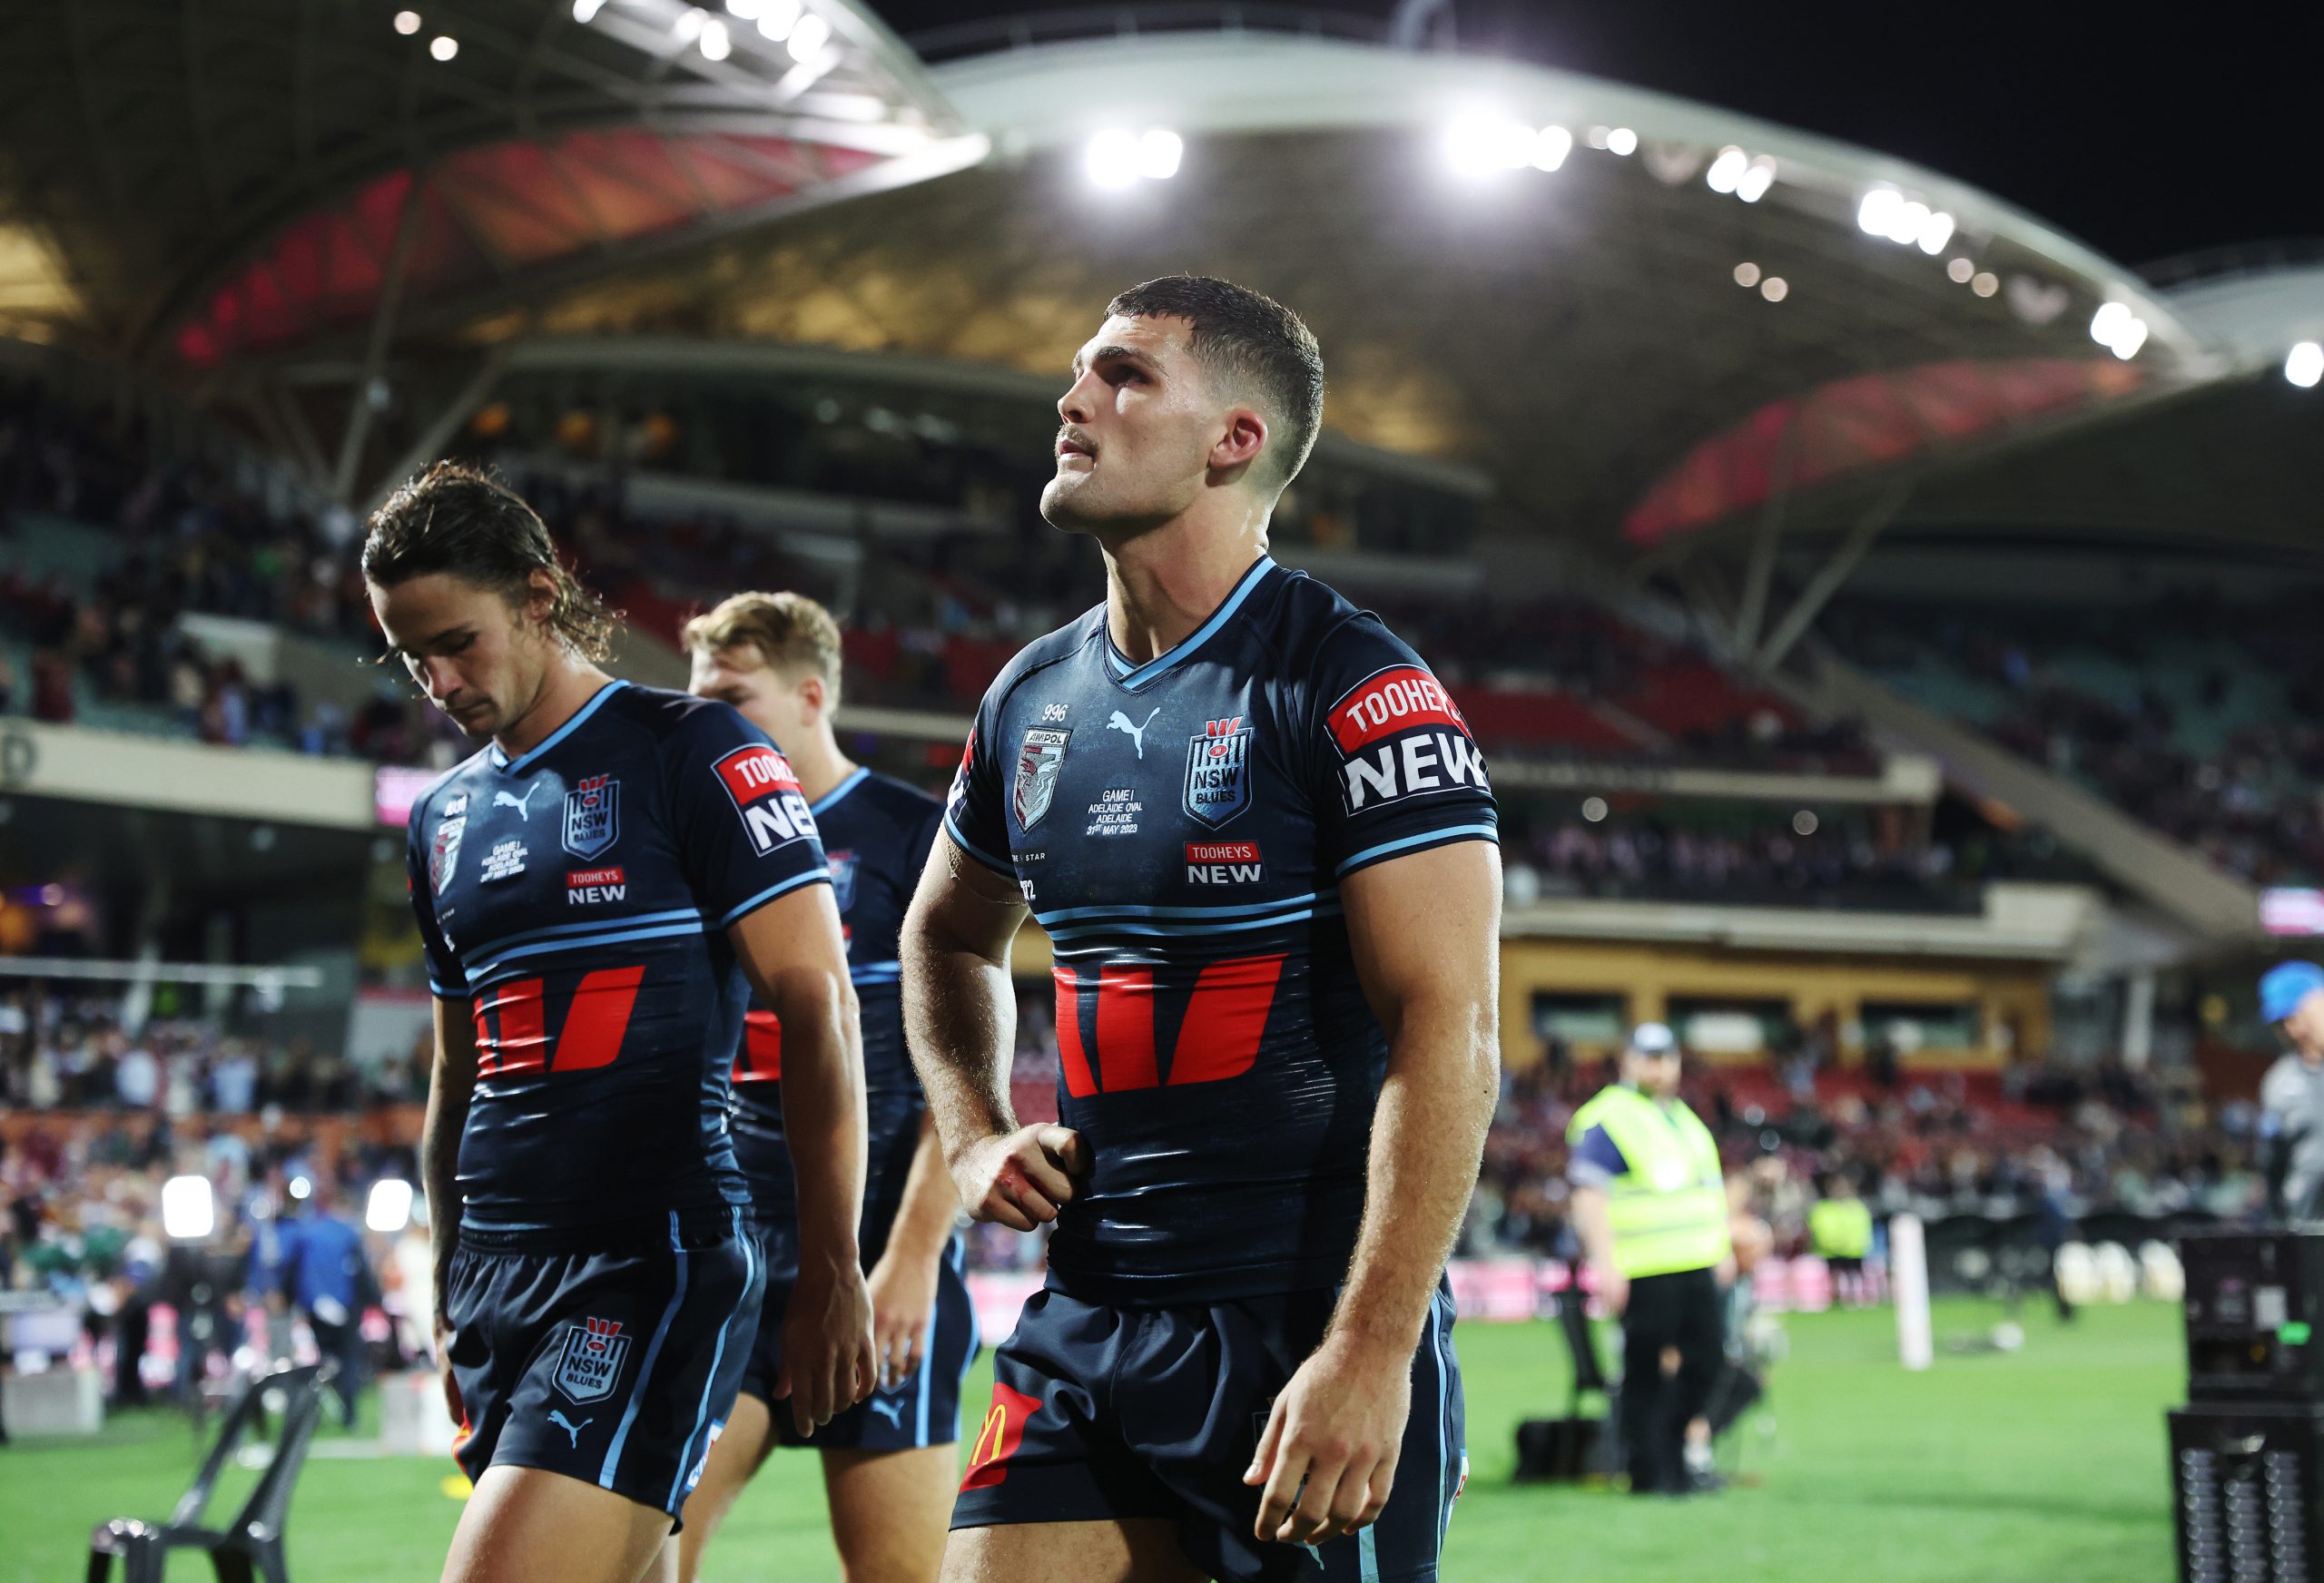 ADELAIDE, AUSTRALIA - MAY 31:  Nathan Cleary of the Blues looks dejected as he walks from the field after defeat during game one of the 2023 State of Origin series between the Queensland Maroons and New South Wales Blues at Adelaide Oval on May 31, 2023 in Adelaide, Australia. (Photo by Mark Kolbe/Getty Images)